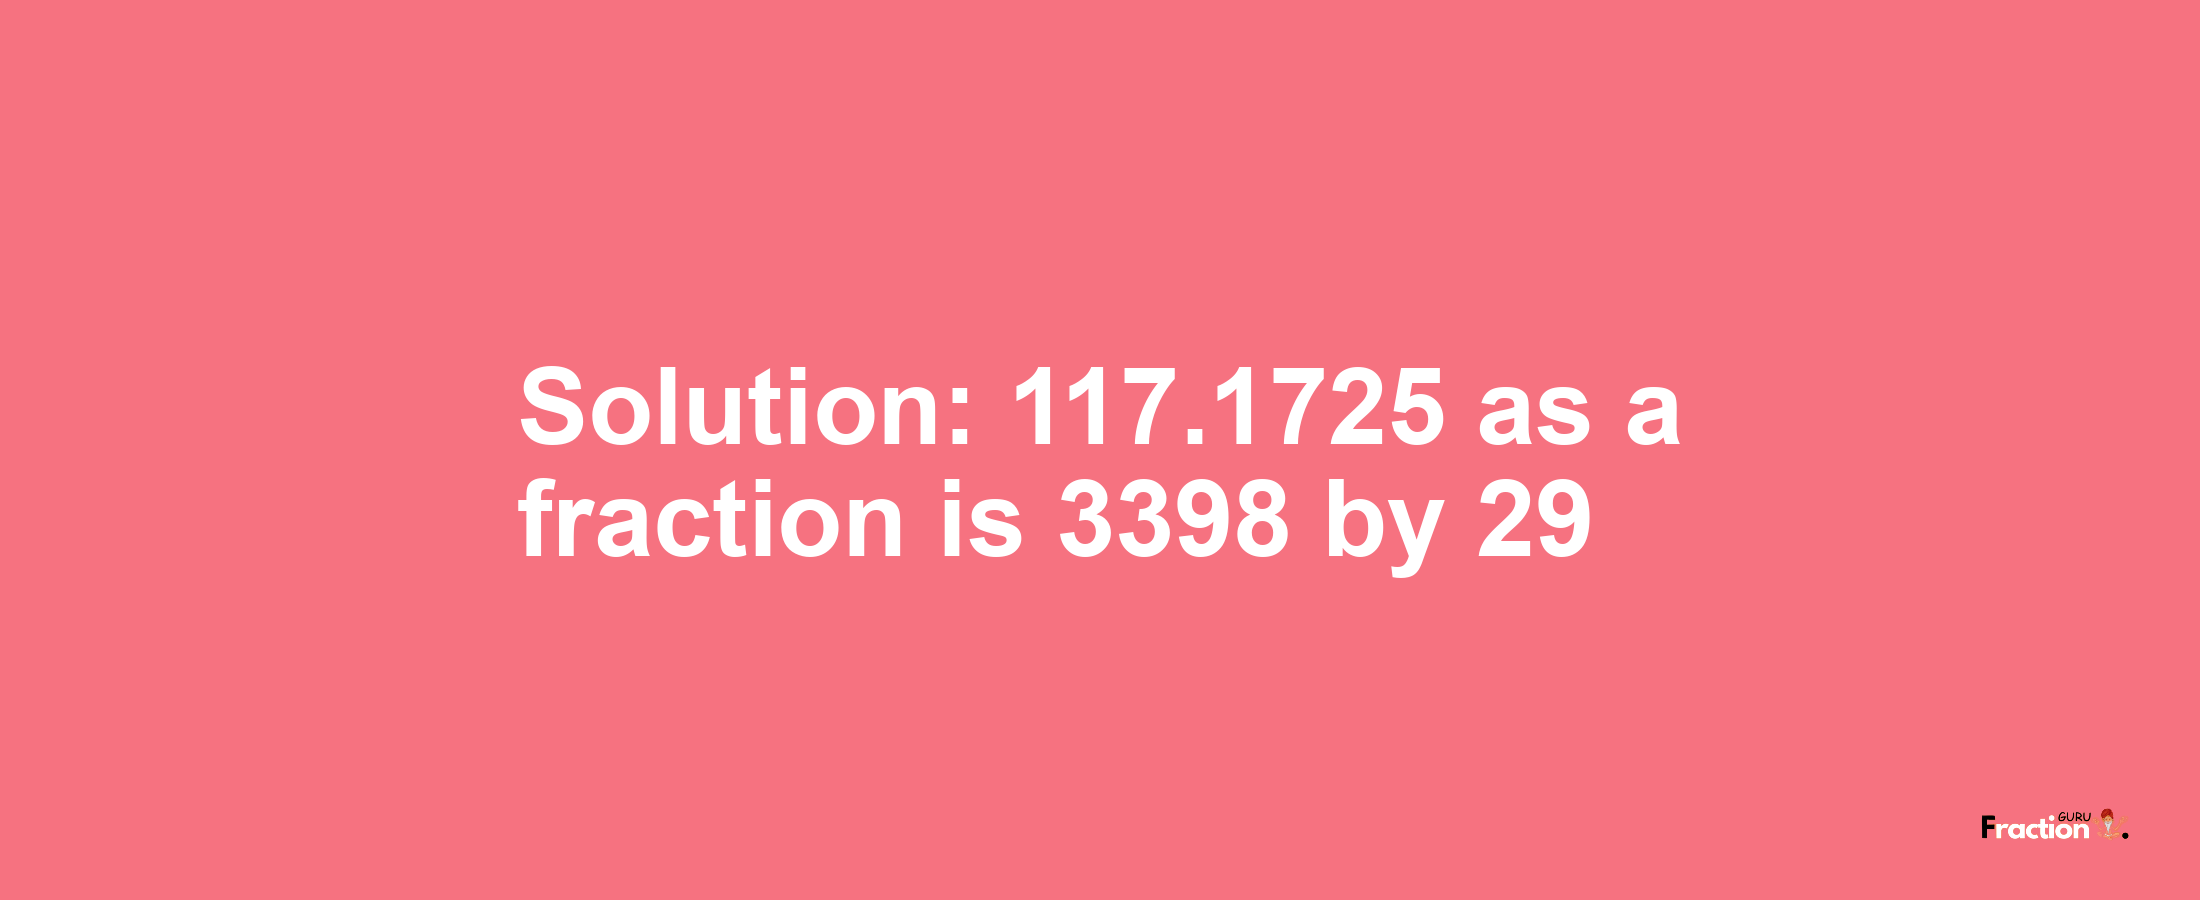 Solution:117.1725 as a fraction is 3398/29